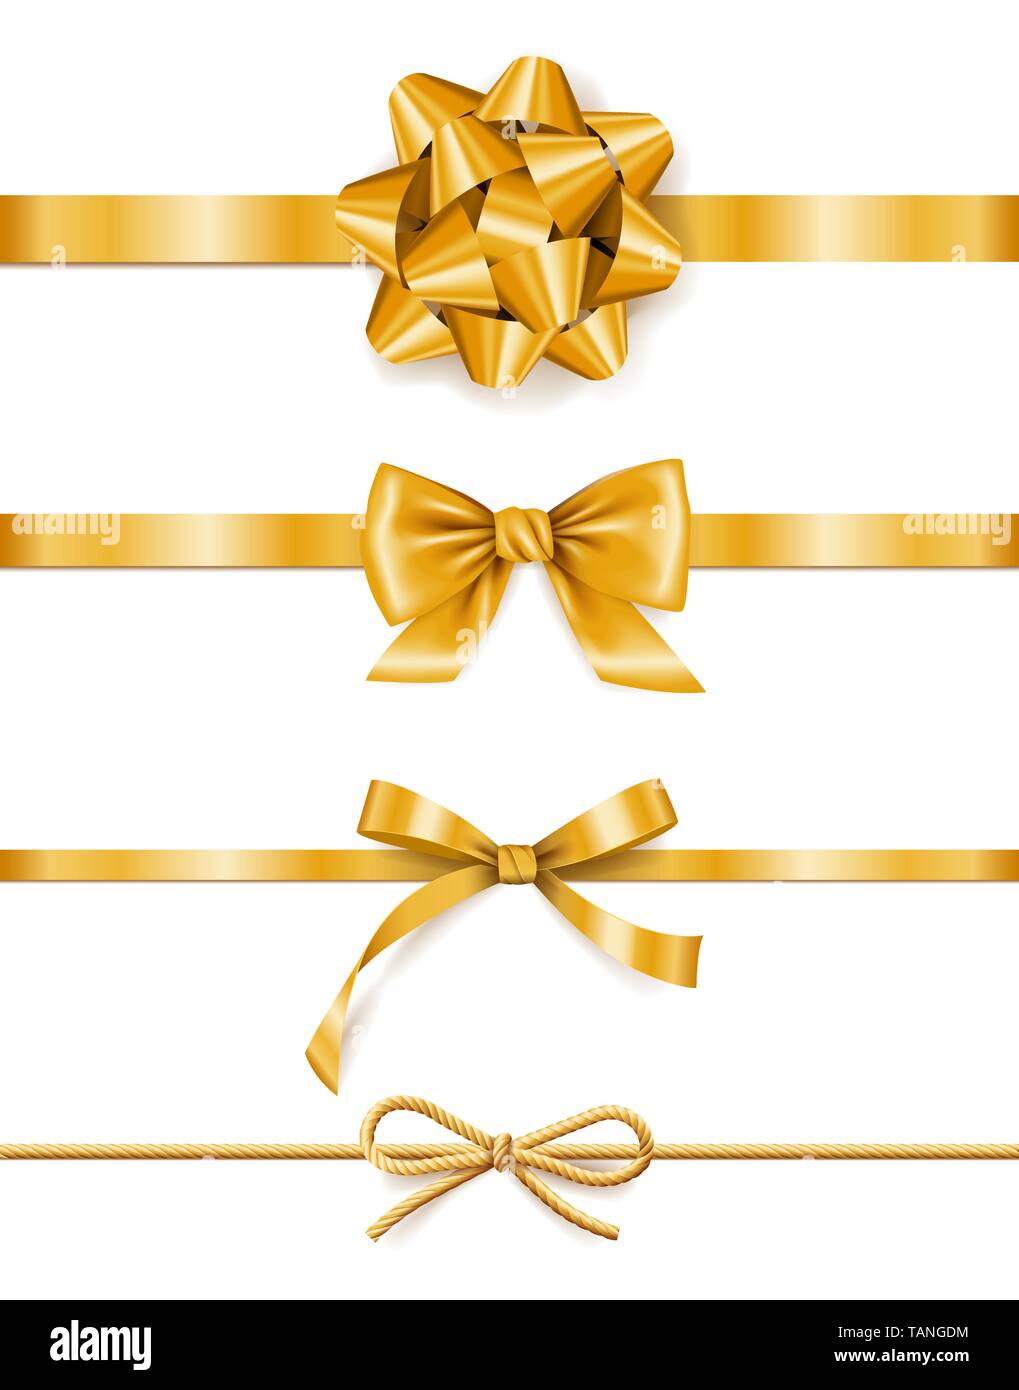 Set of golden ribbons with bows, decoration for gift boxes, design